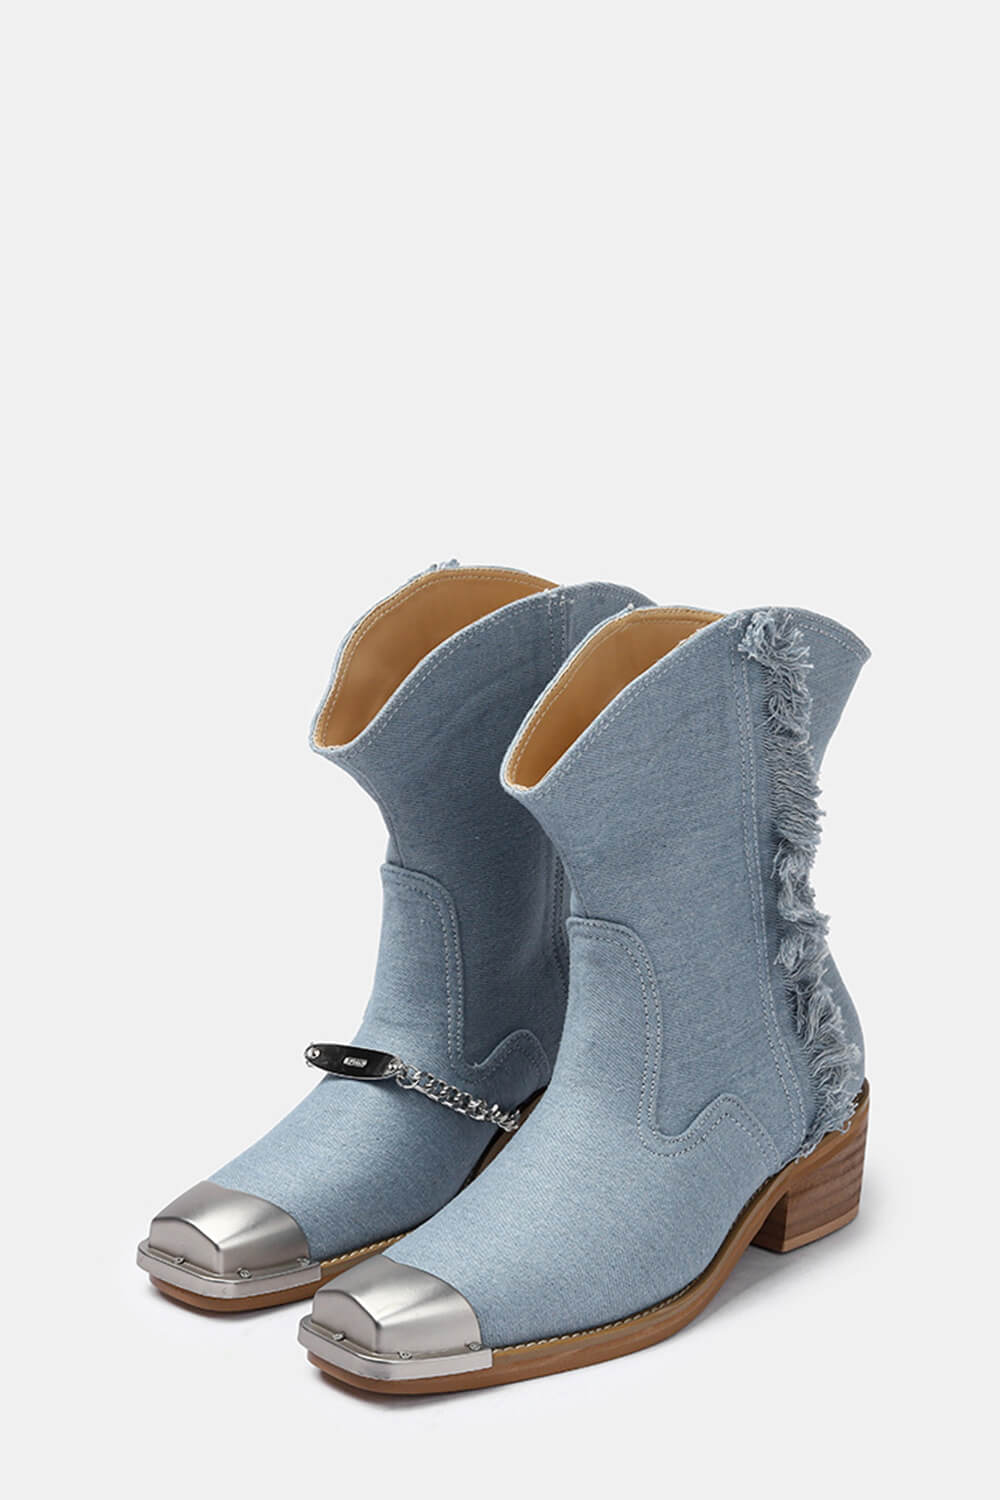 Denim Chain-Link Fringe Ankle Western Cowboy Boots With Square Toe And Hardware Detail - Blue